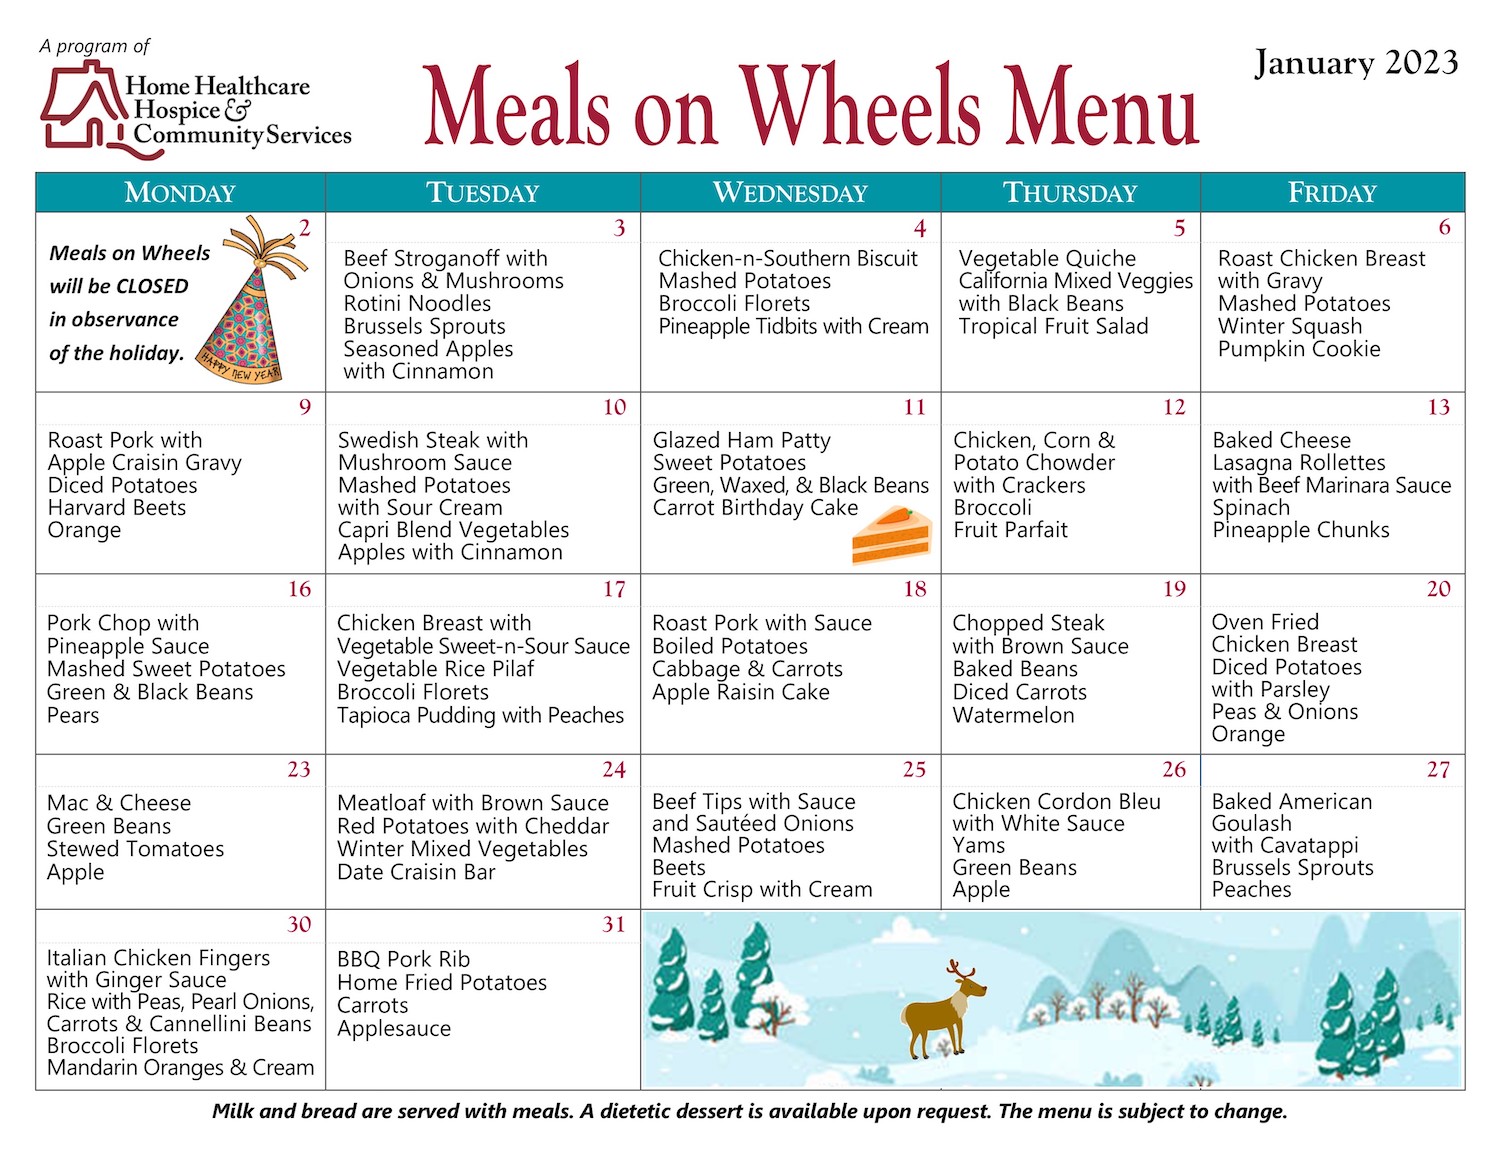 Meals On Wheels Menu for January 2023